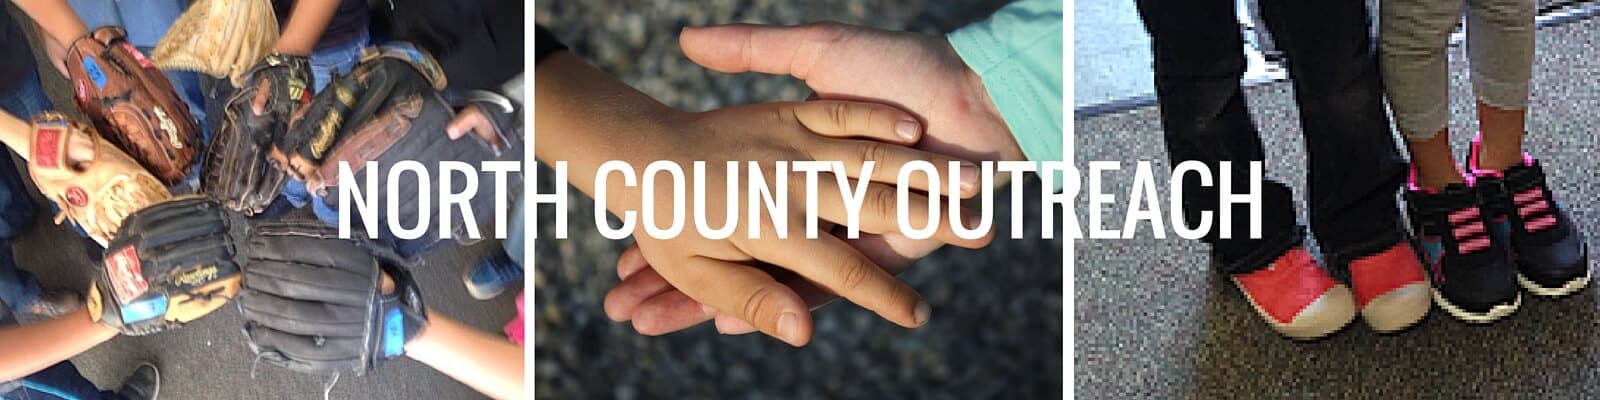 Featured Banner - North County Outreach